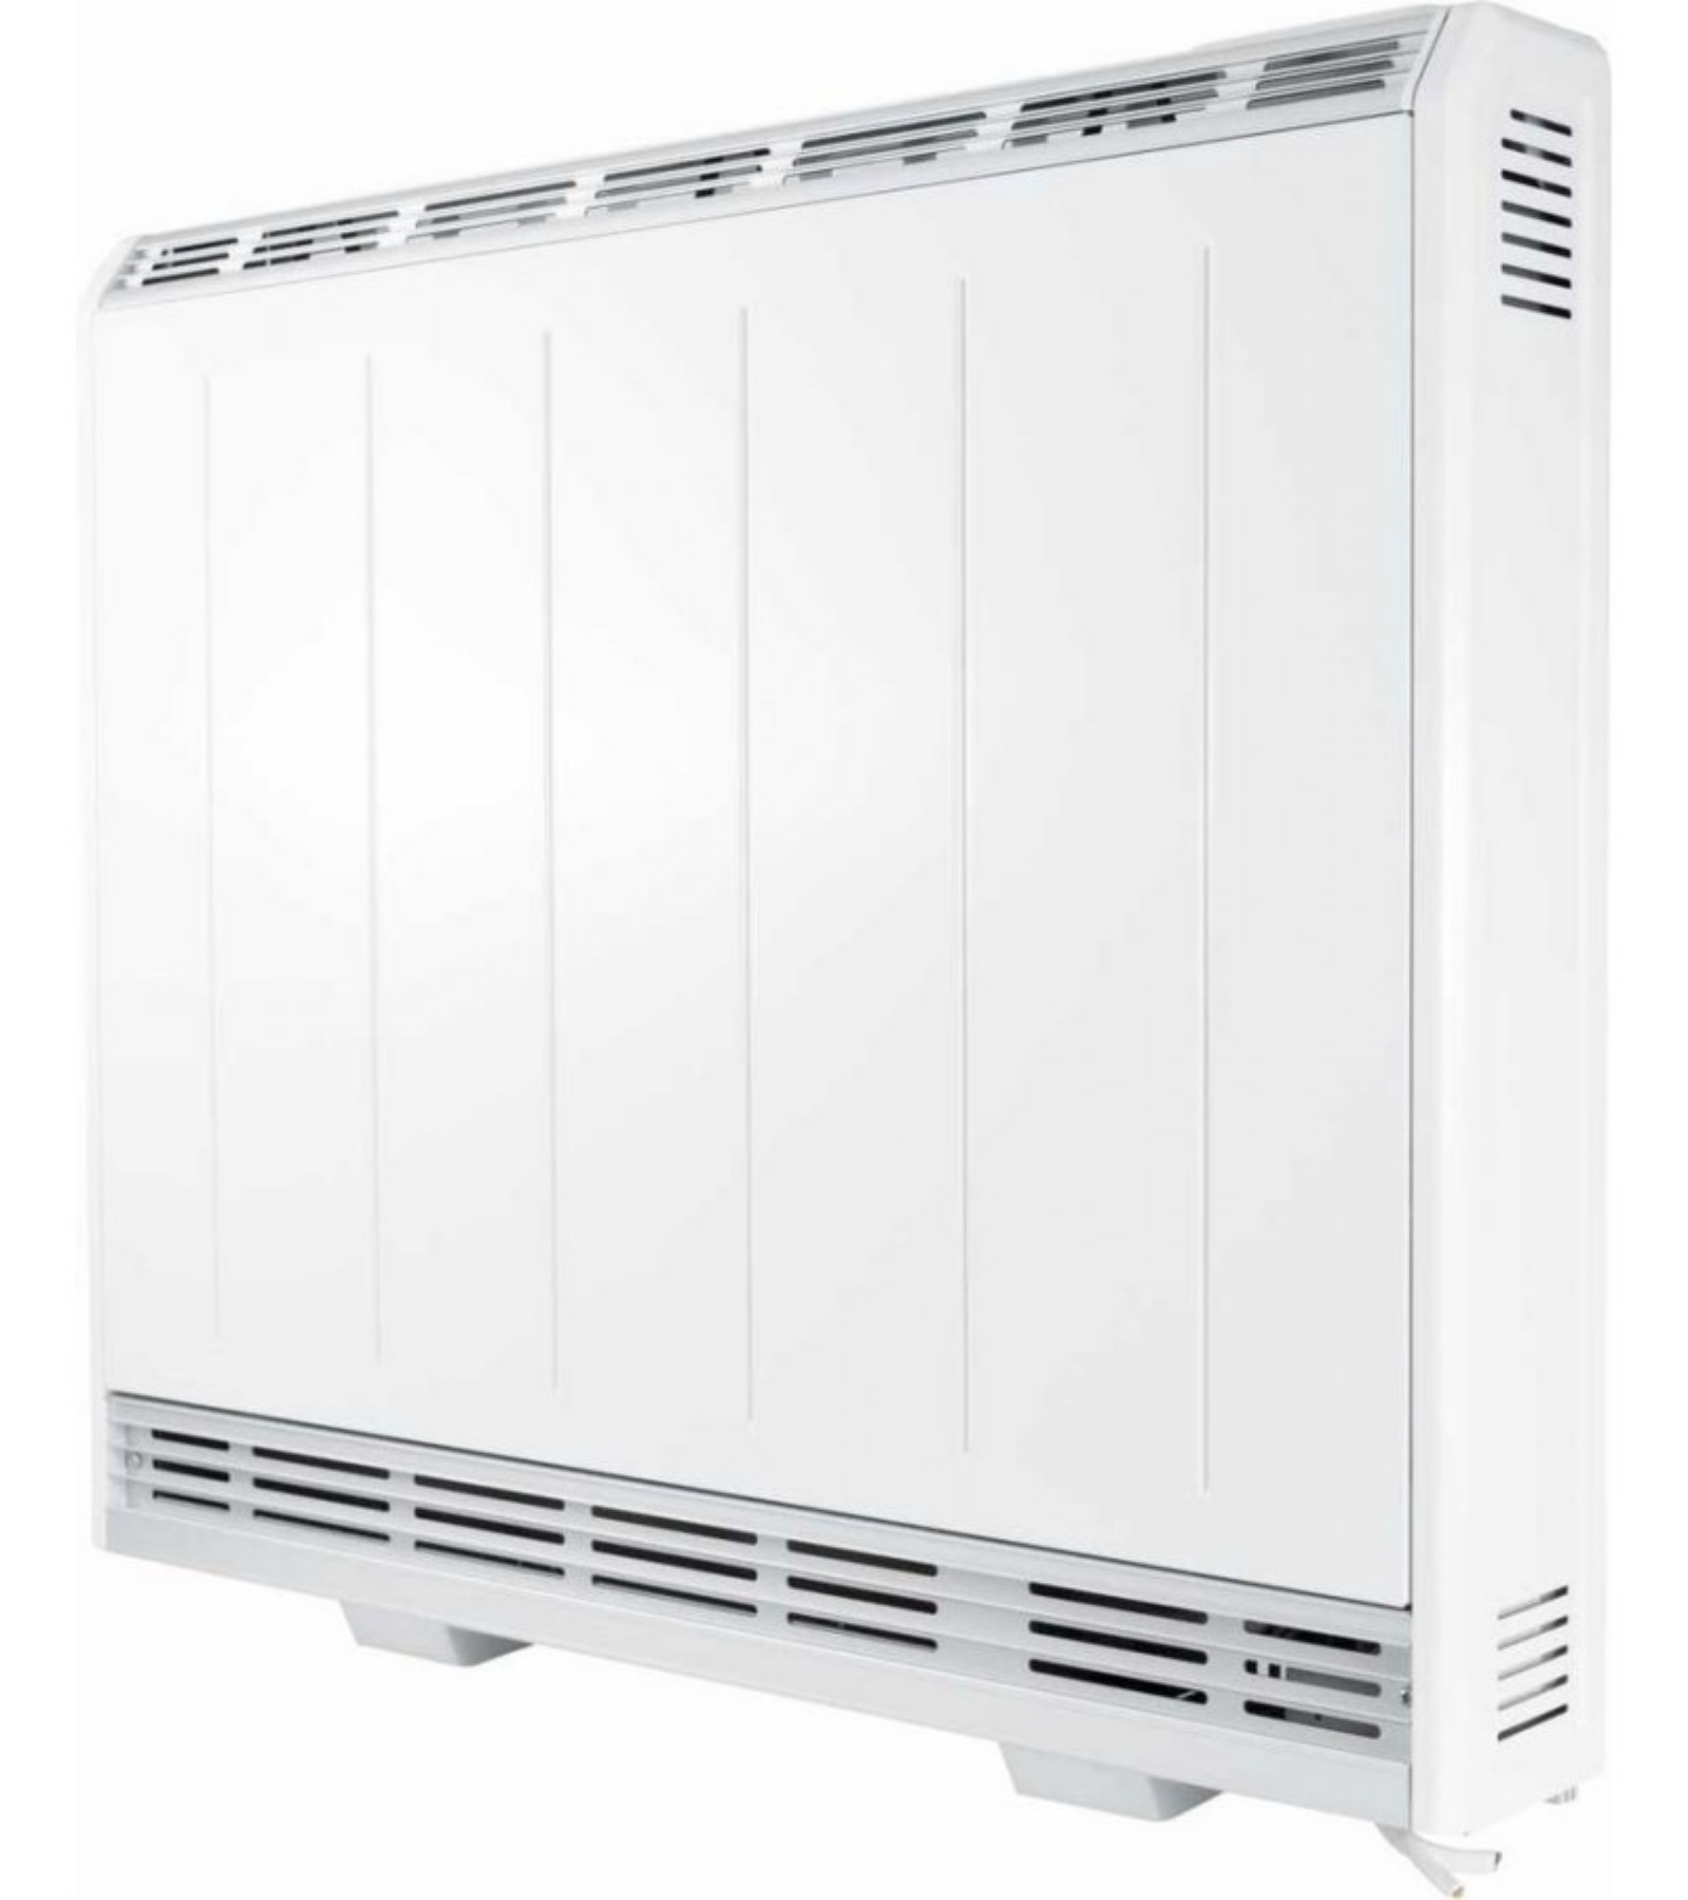 Picture of Sunhouse SSHE070 0.7kW Storage Heater